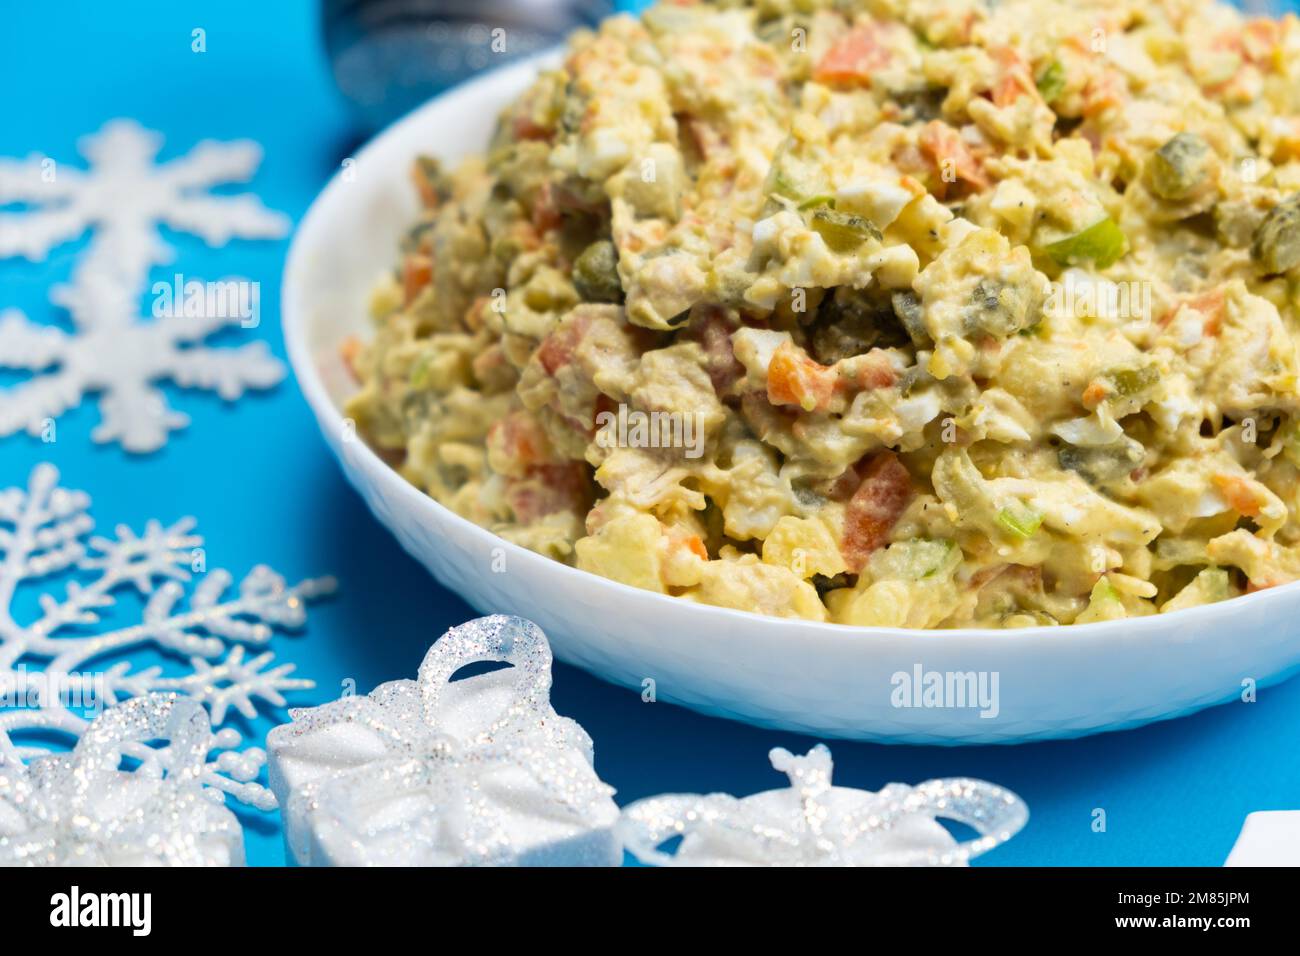 Olivier Russian salad, Christmas and New Year food, blue background, top view. Stock Photo